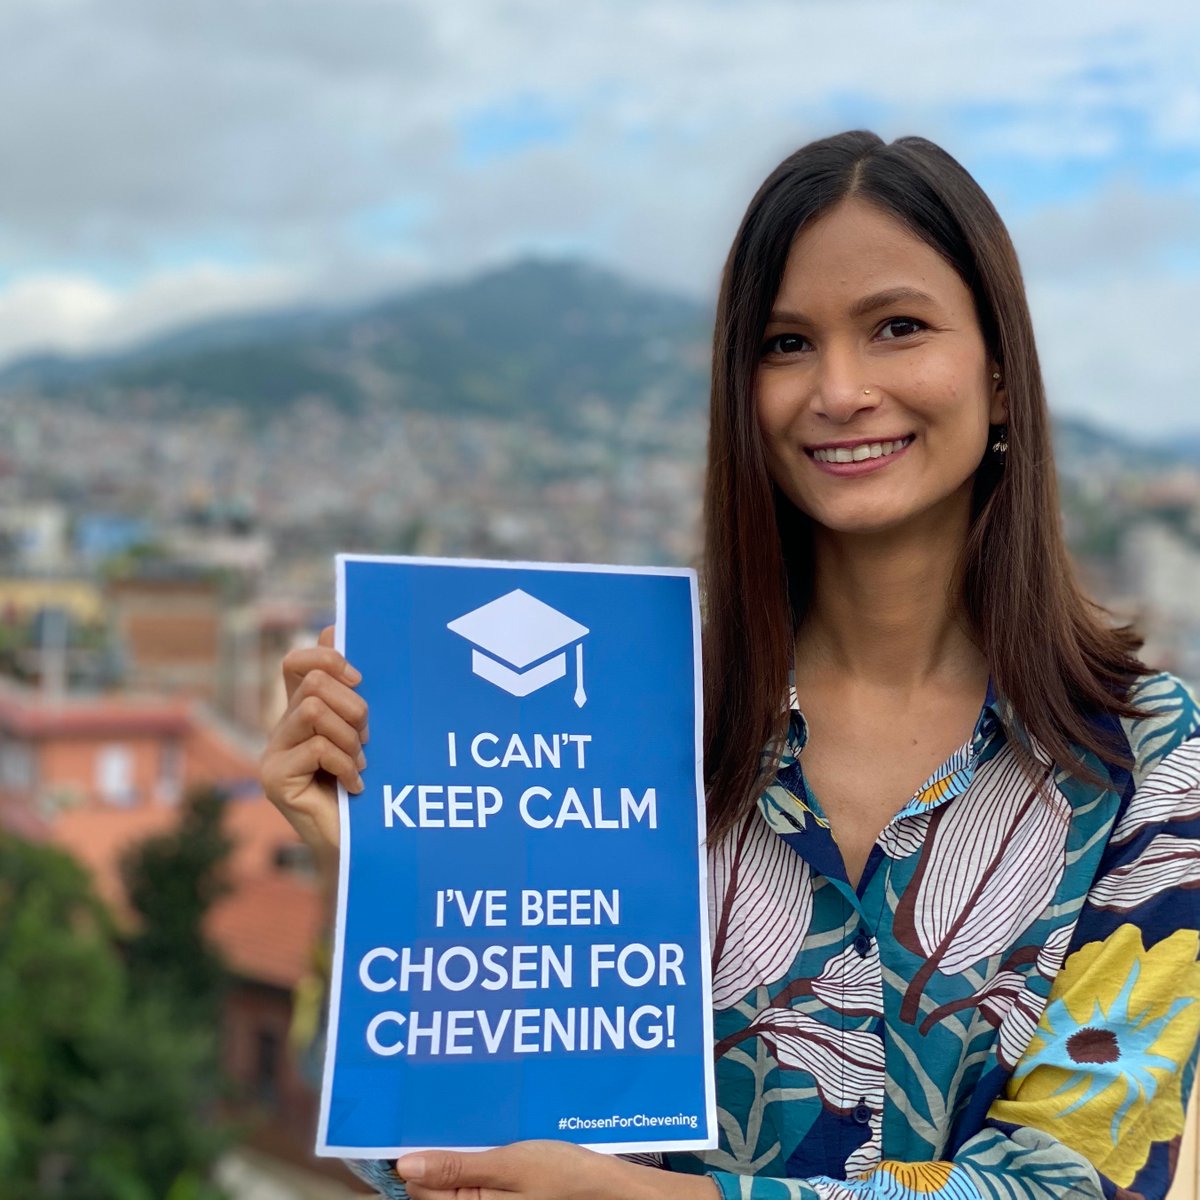 I CAN'T KEEP CALM!
I CAN'T KEEP CALM!!
I CAN'T KEEP CALM!!!

Words might not do justice in expressing how immensely thrilled I am to officially embark upon my #CheveningJourney. All I would say is I couldn't have asked for more! Thank you @cheveningfco! 

#ChosenForChevening